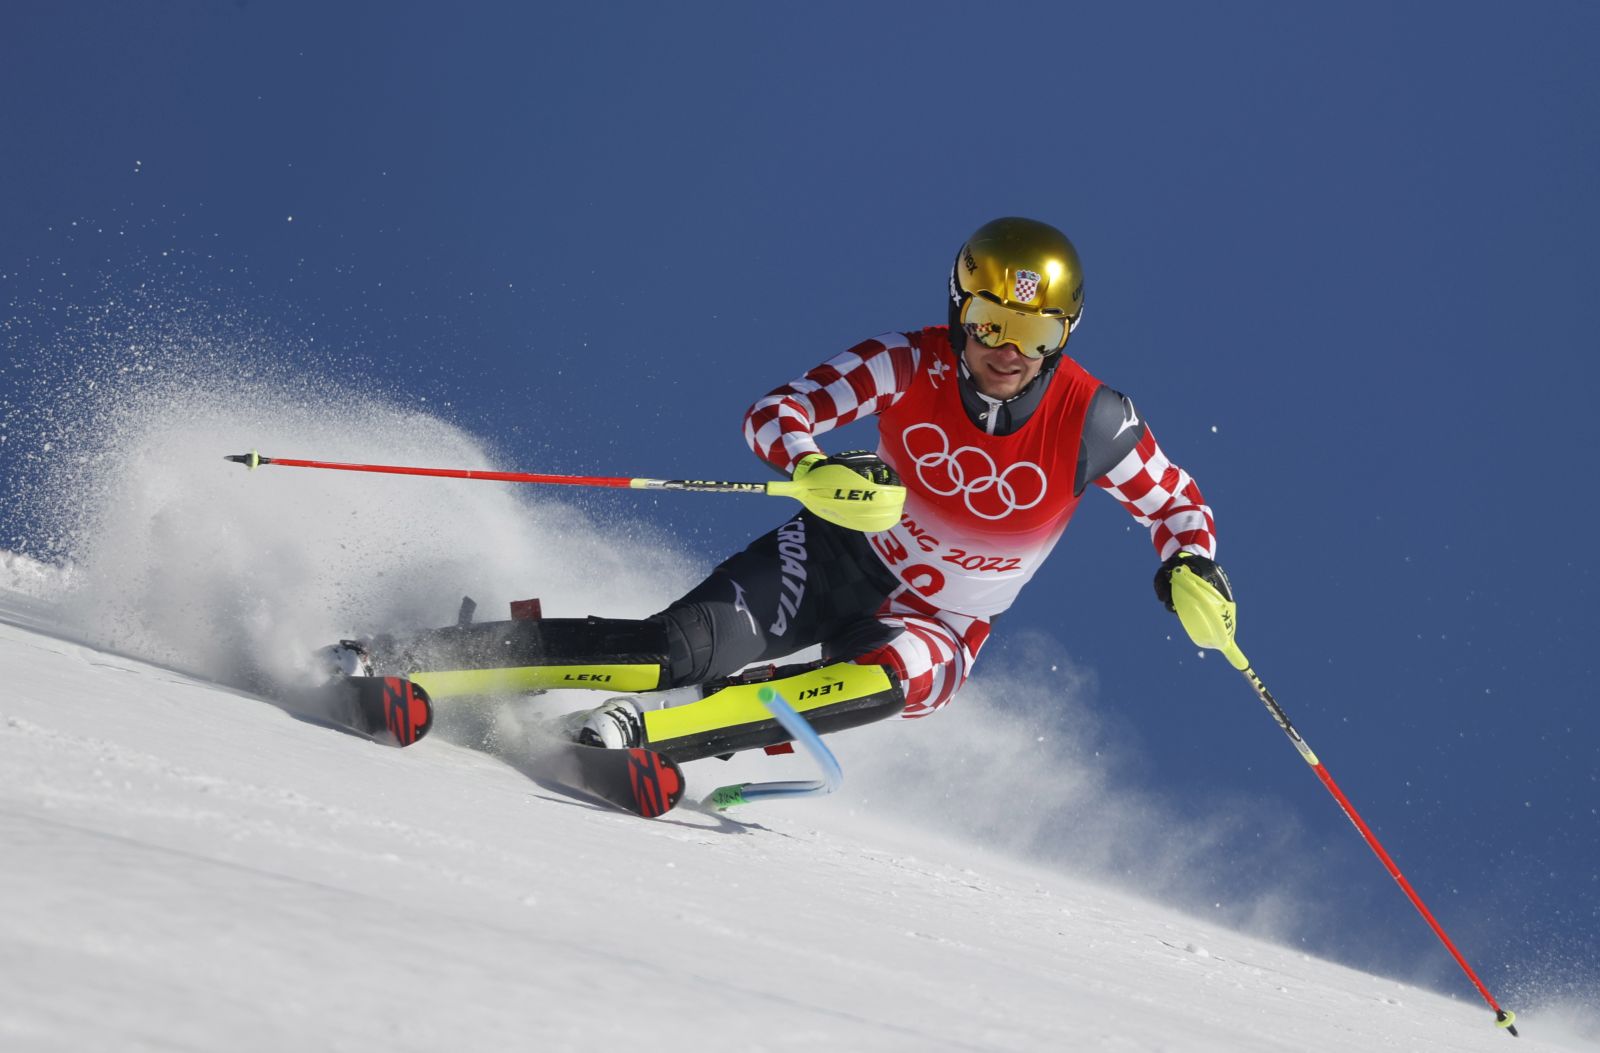 epa09760888 Samuel Kolega of Croatia clears a gate during the second run of the Men's Slalom race of the Alpine Skiing events of the Beijing 2022 Olympic Games at the Yanqing National Alpine Ski Centre Skiing, Beijing municipality, China, 16 February 2022.  EPA/GUILLAUME HORCAJUELO